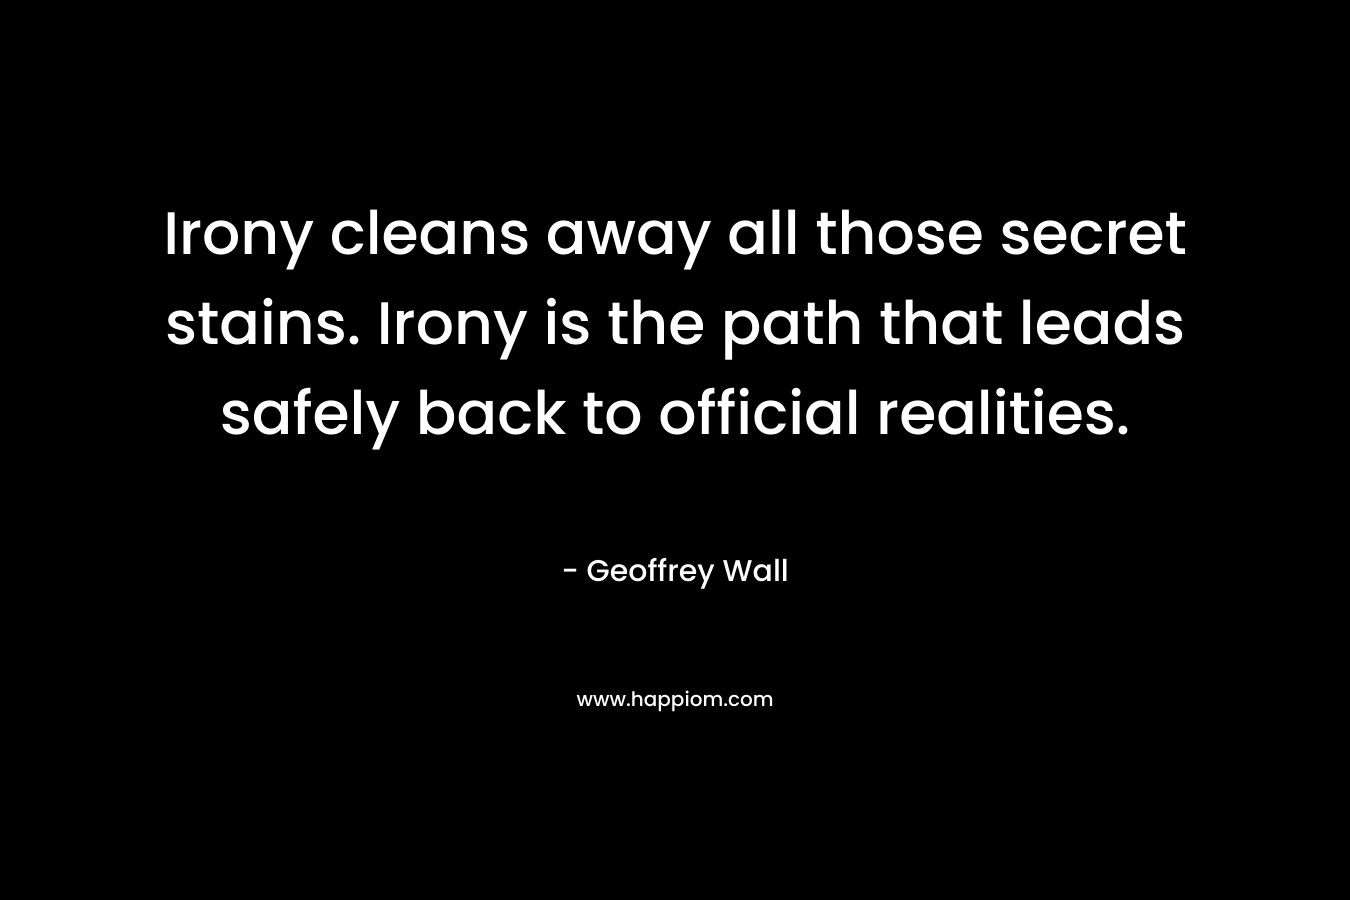 Irony cleans away all those secret stains. Irony is the path that leads safely back to official realities. – Geoffrey Wall